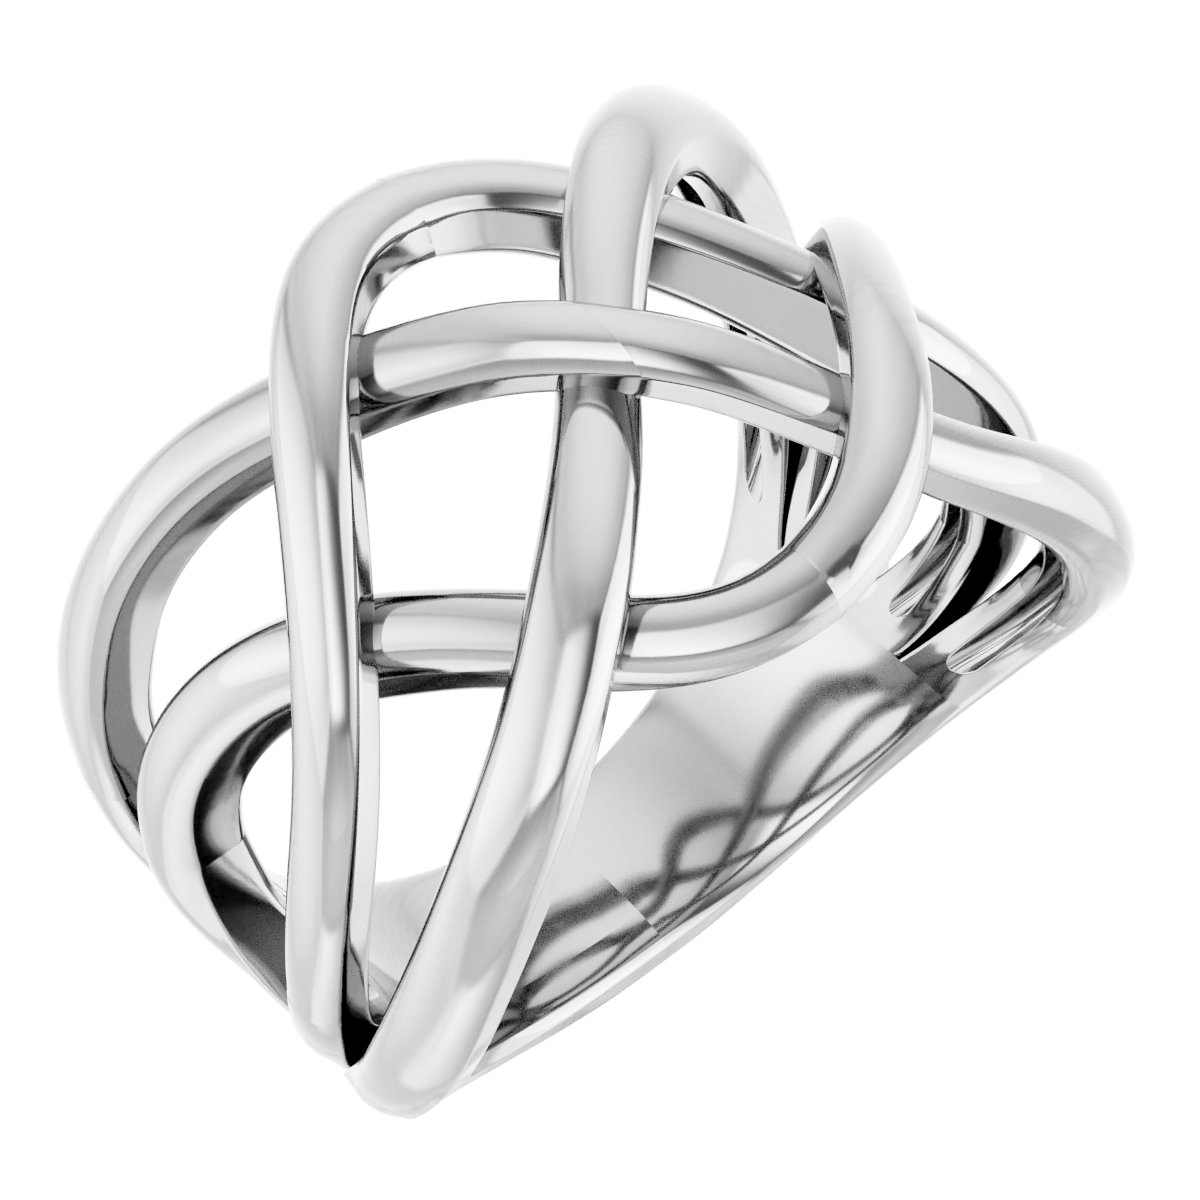 Sterling Silver Criss-Cross Ring